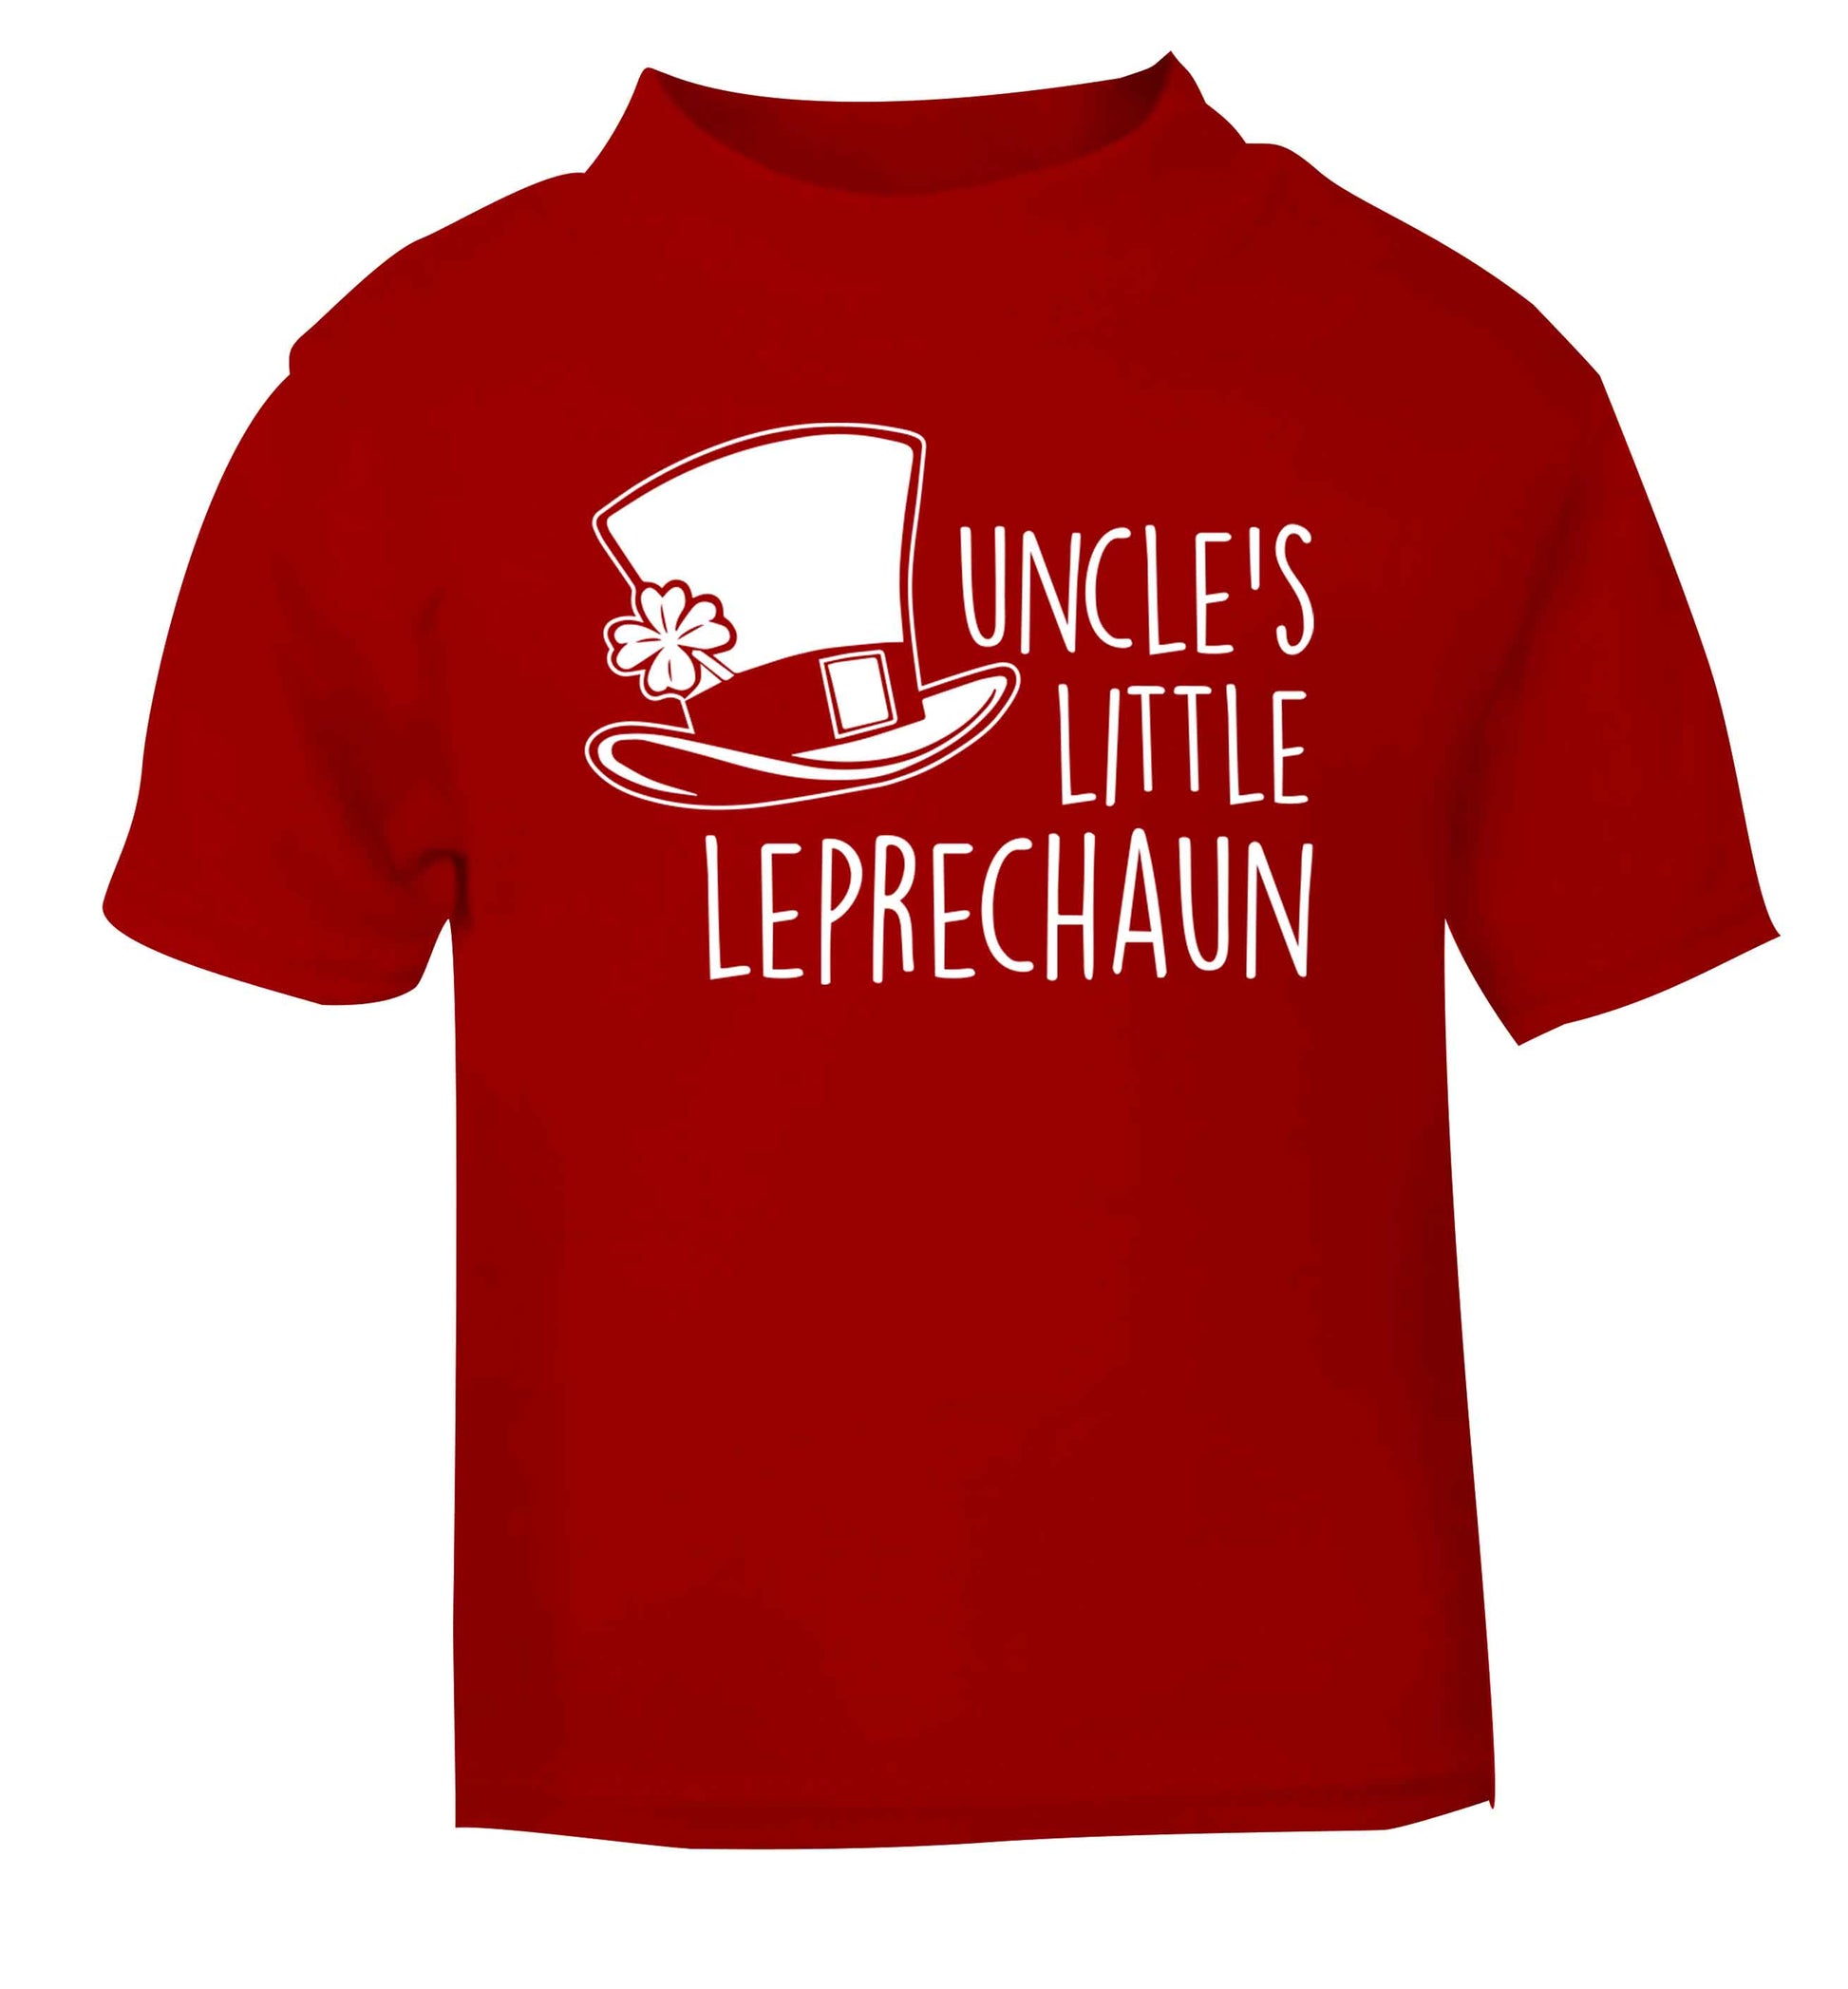 Uncles little leprechaun red baby toddler Tshirt 2 Years